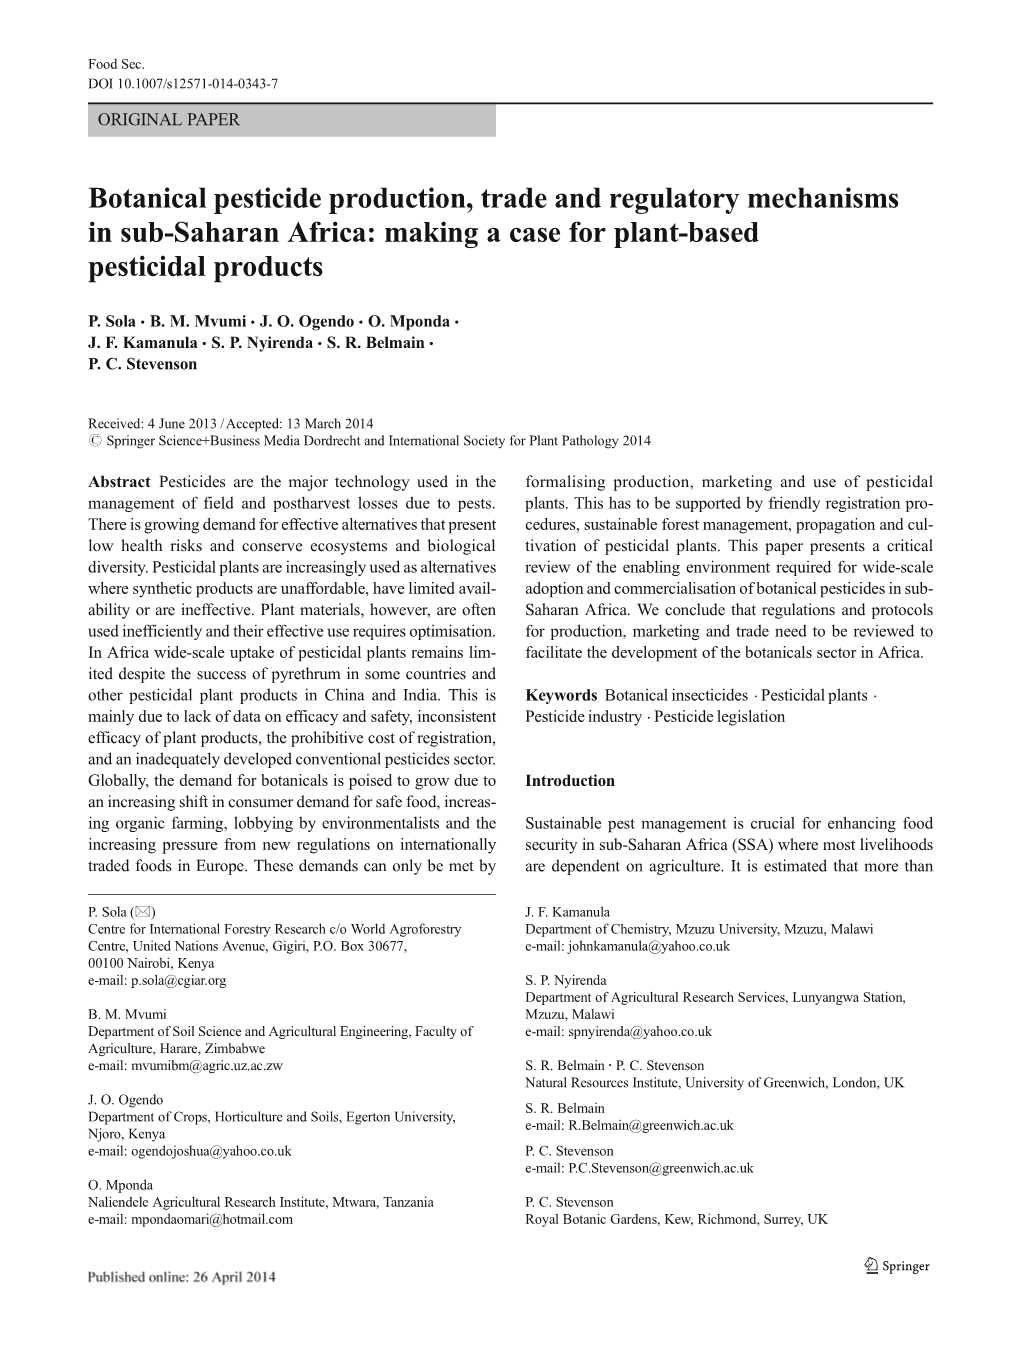 Botanical Pesticide Production, Trade and Regulatory Mechanisms in Sub-Saharan Africa: Making a Case for Plant-Based Pesticidal Products